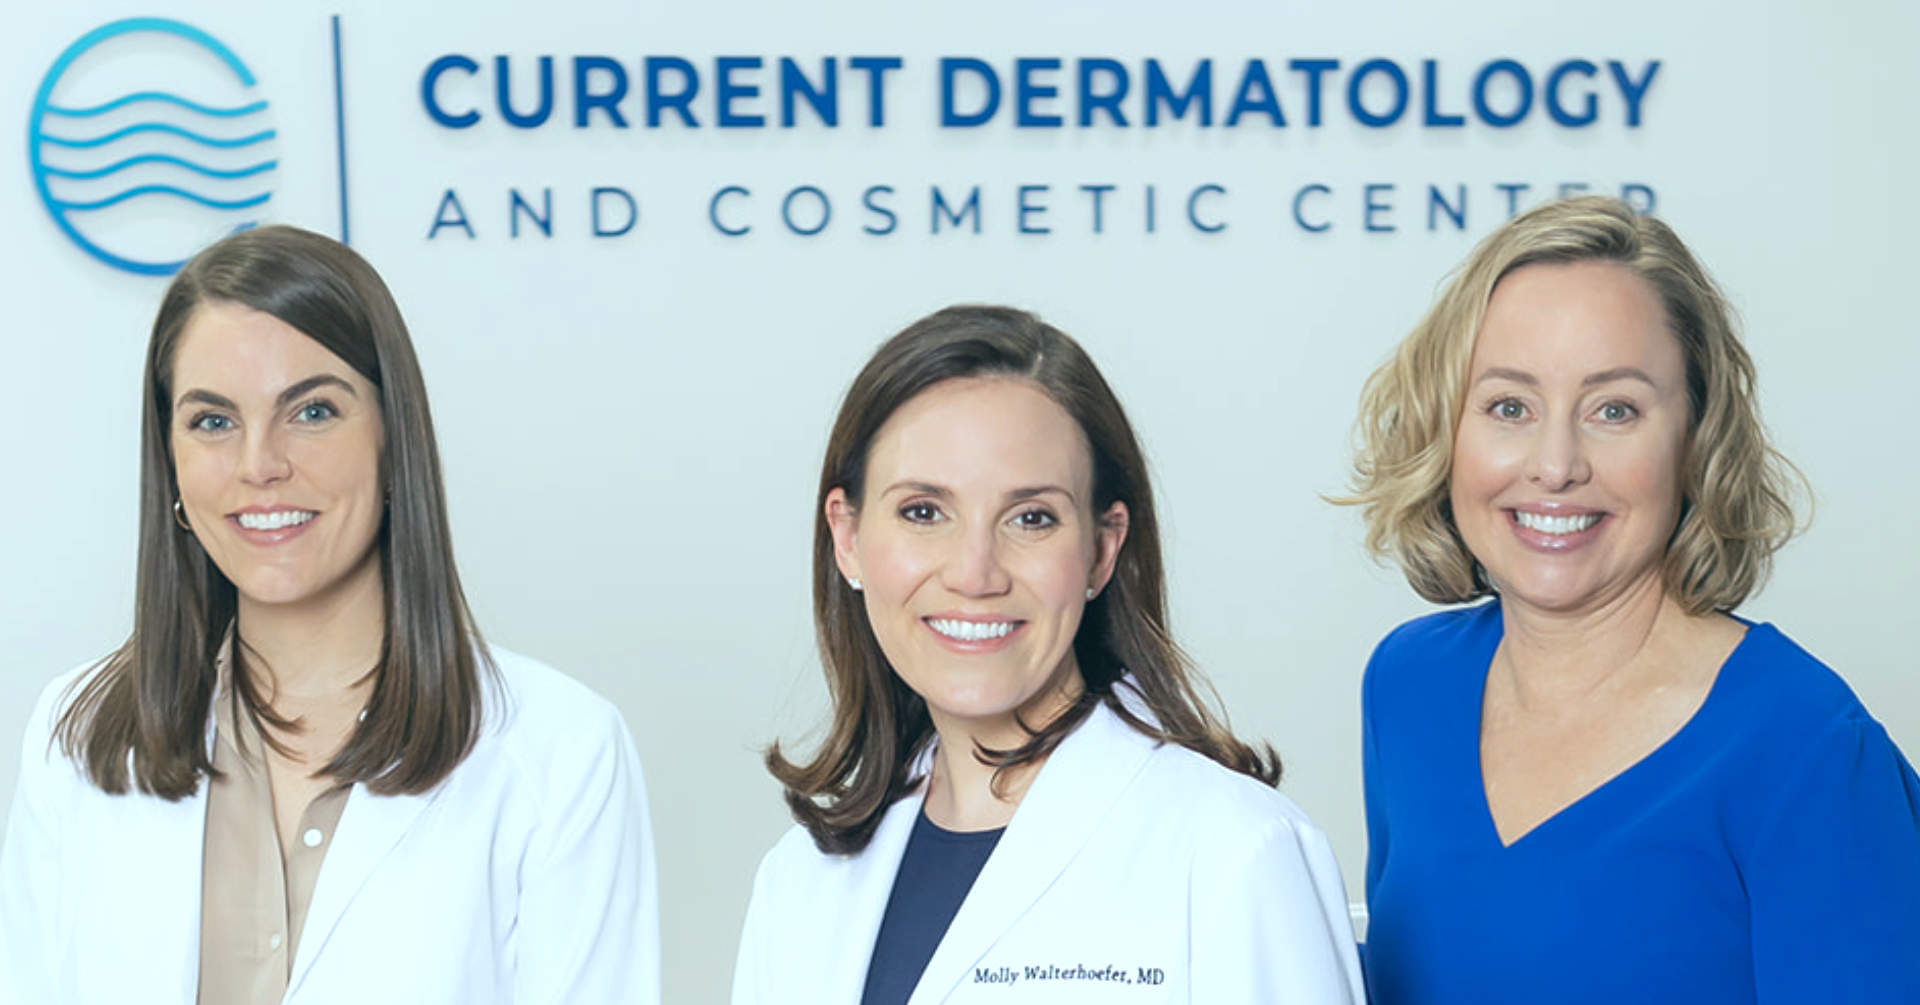 Current Dermatology and Cosmetic Center Team.